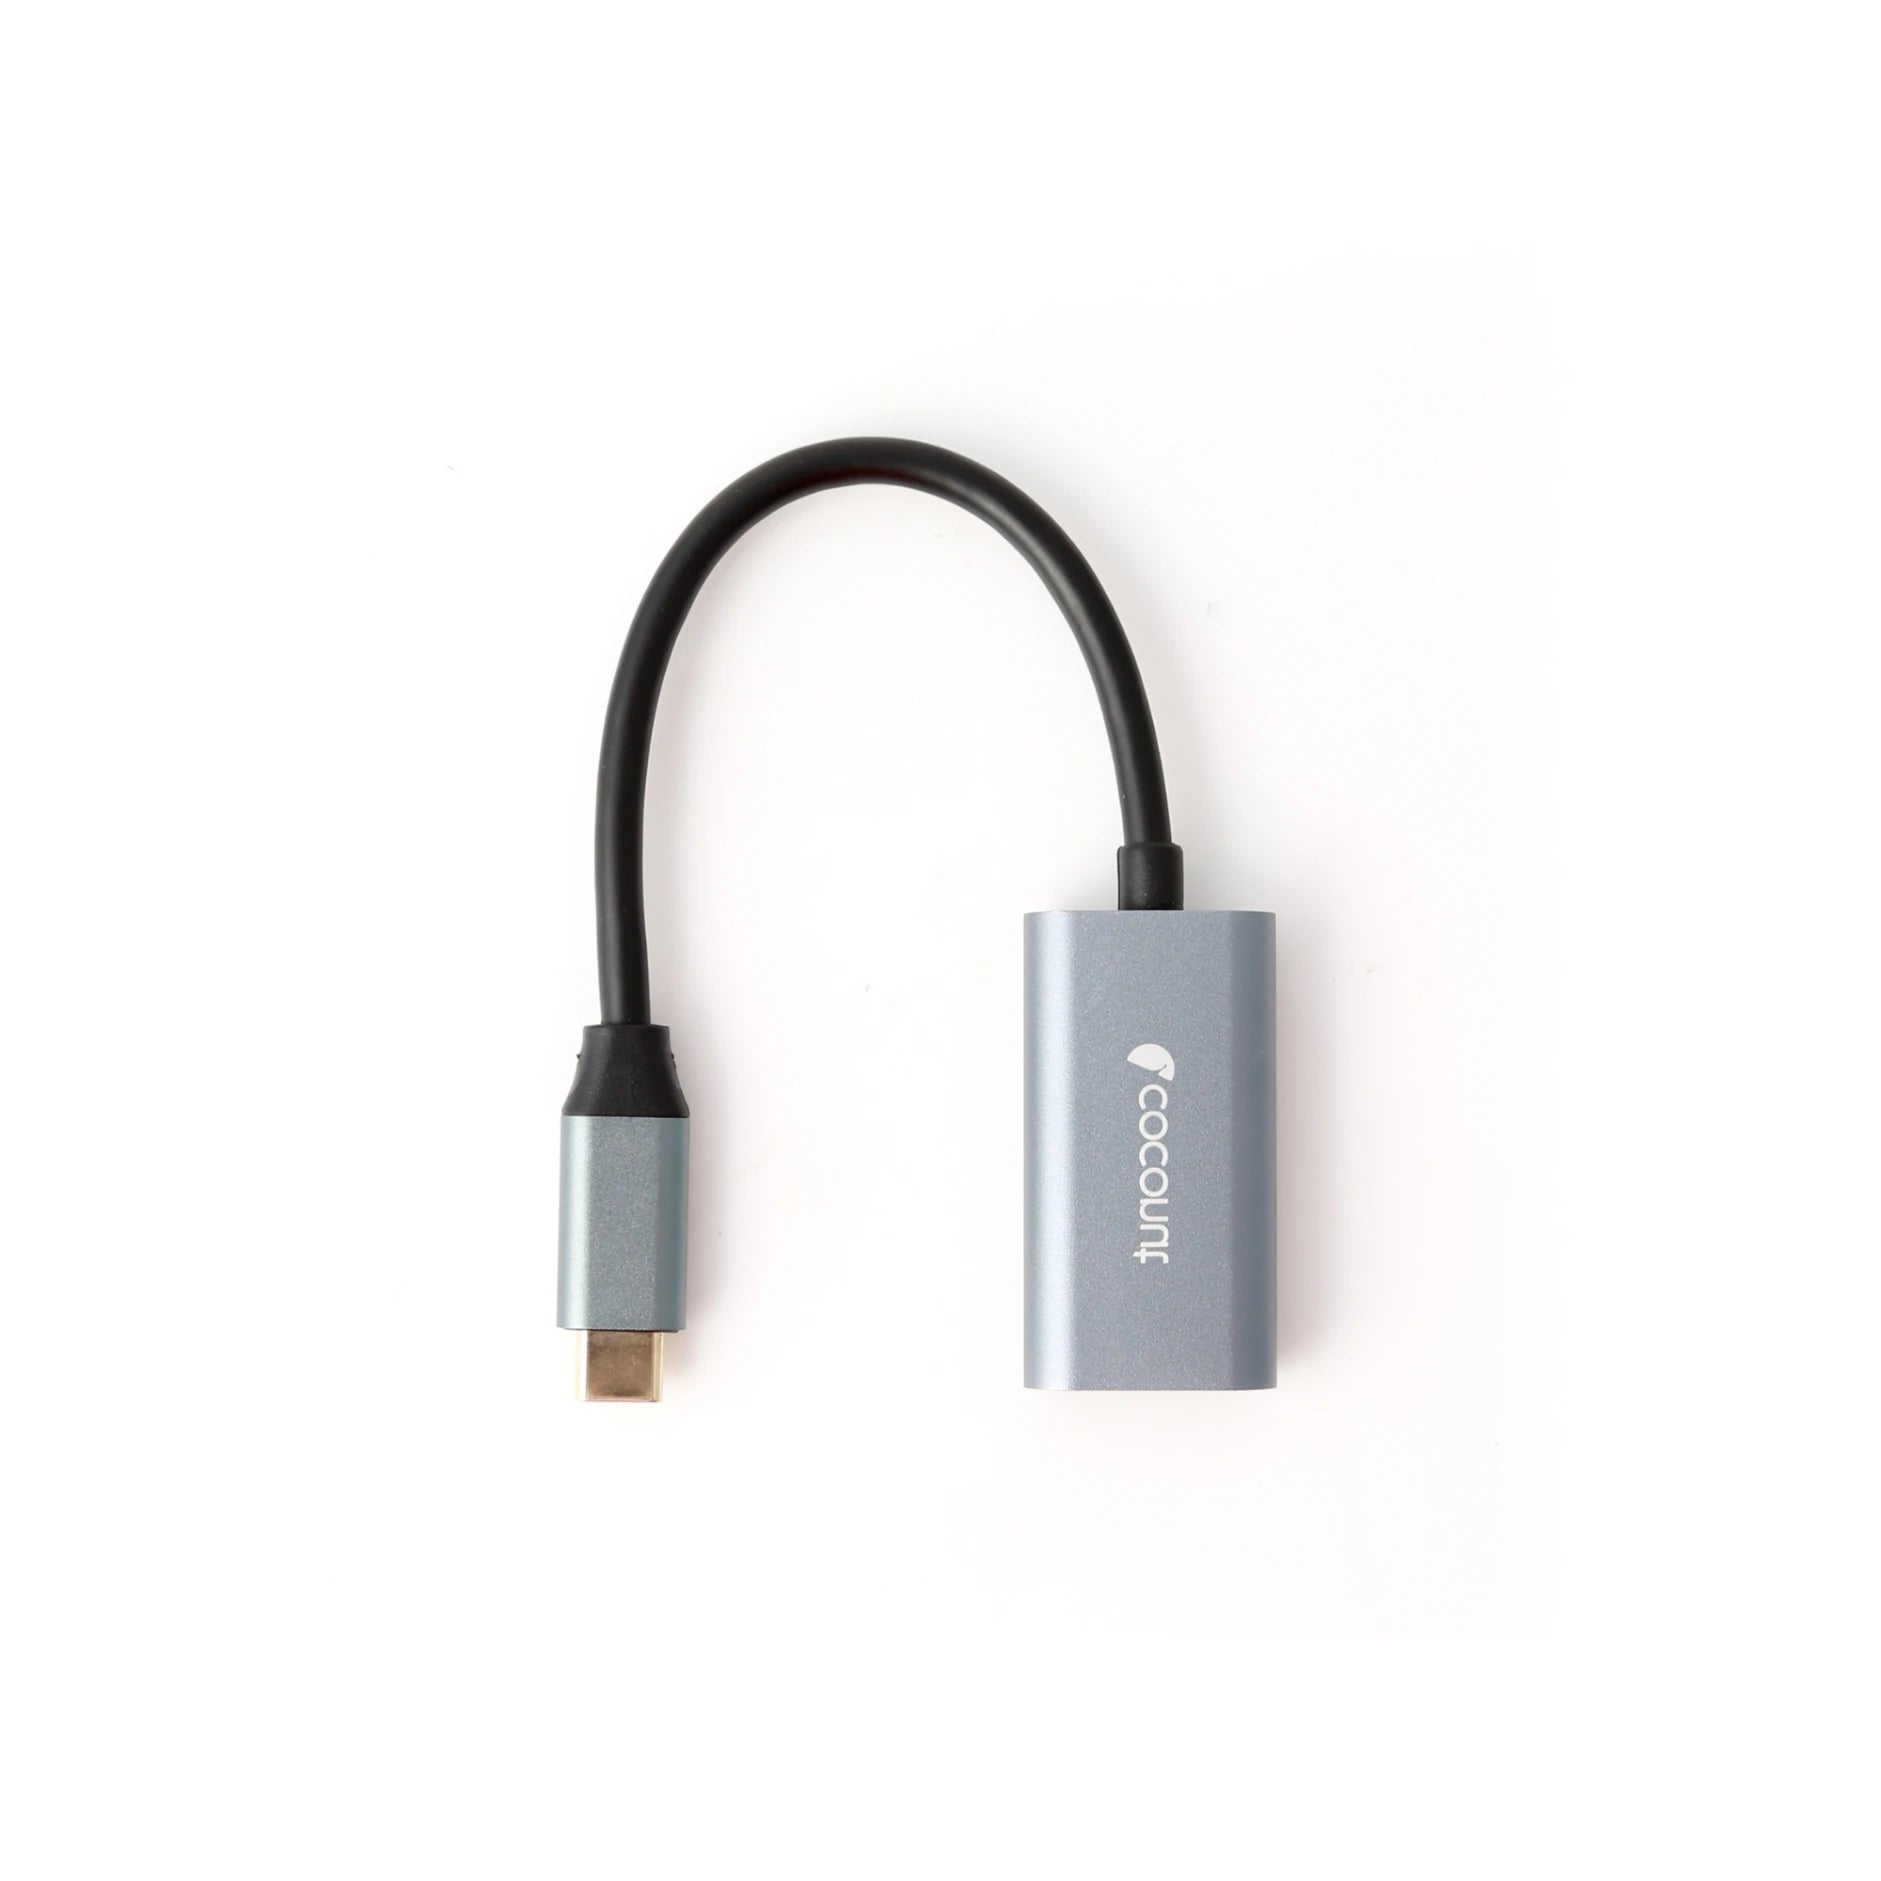 Type C to 4K HDMI Adapter